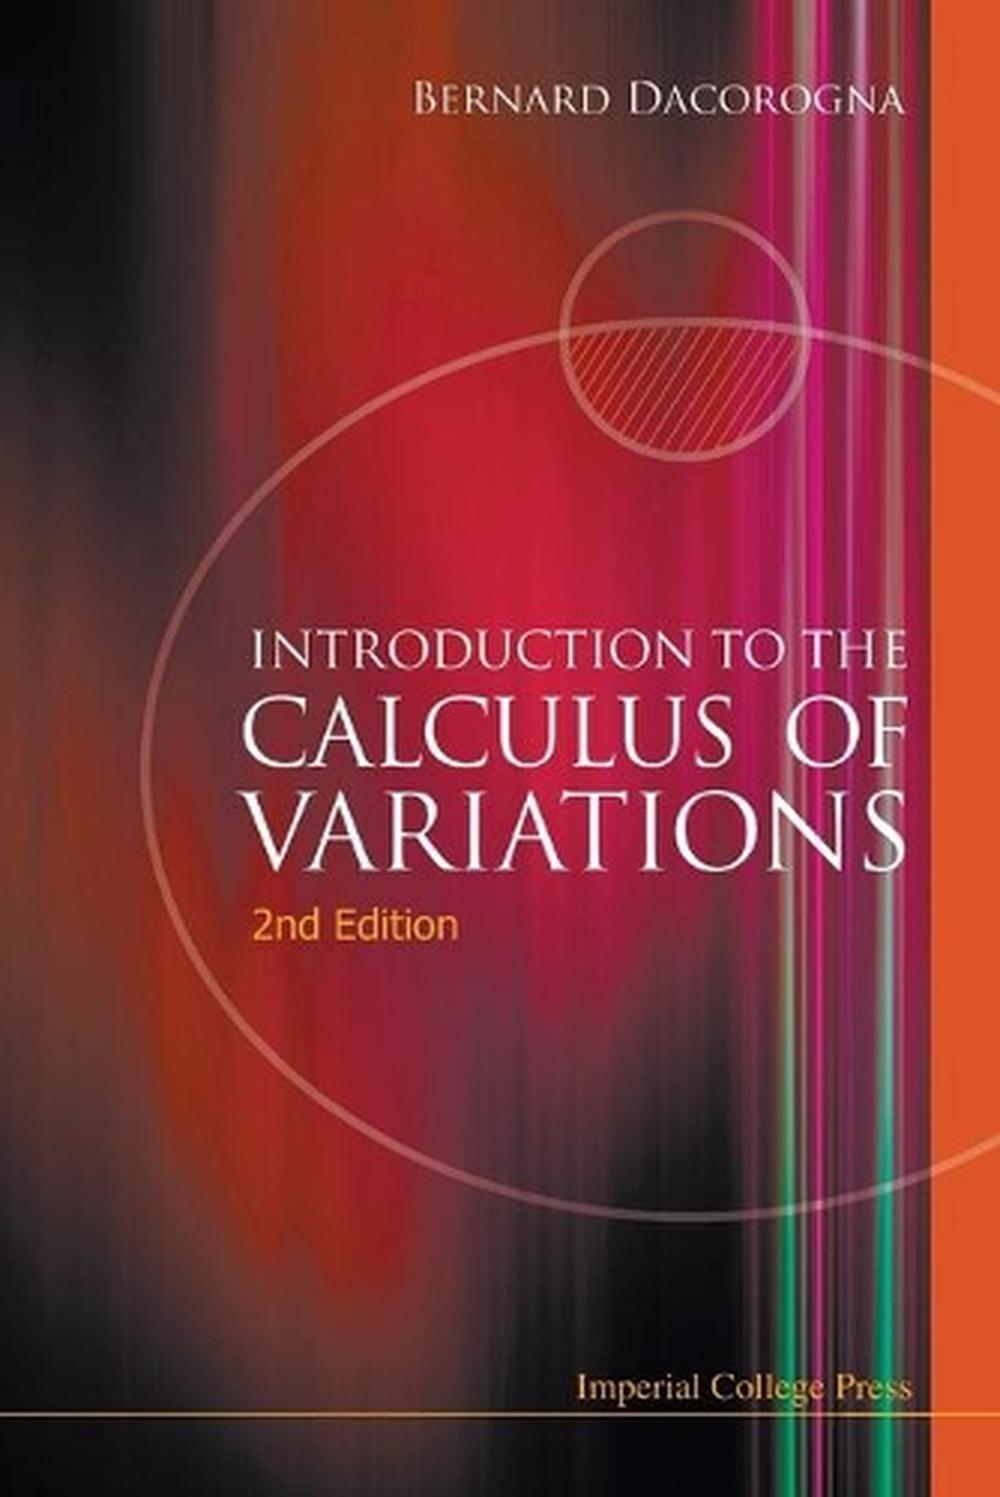 calculus of variations problems and solutions pdf